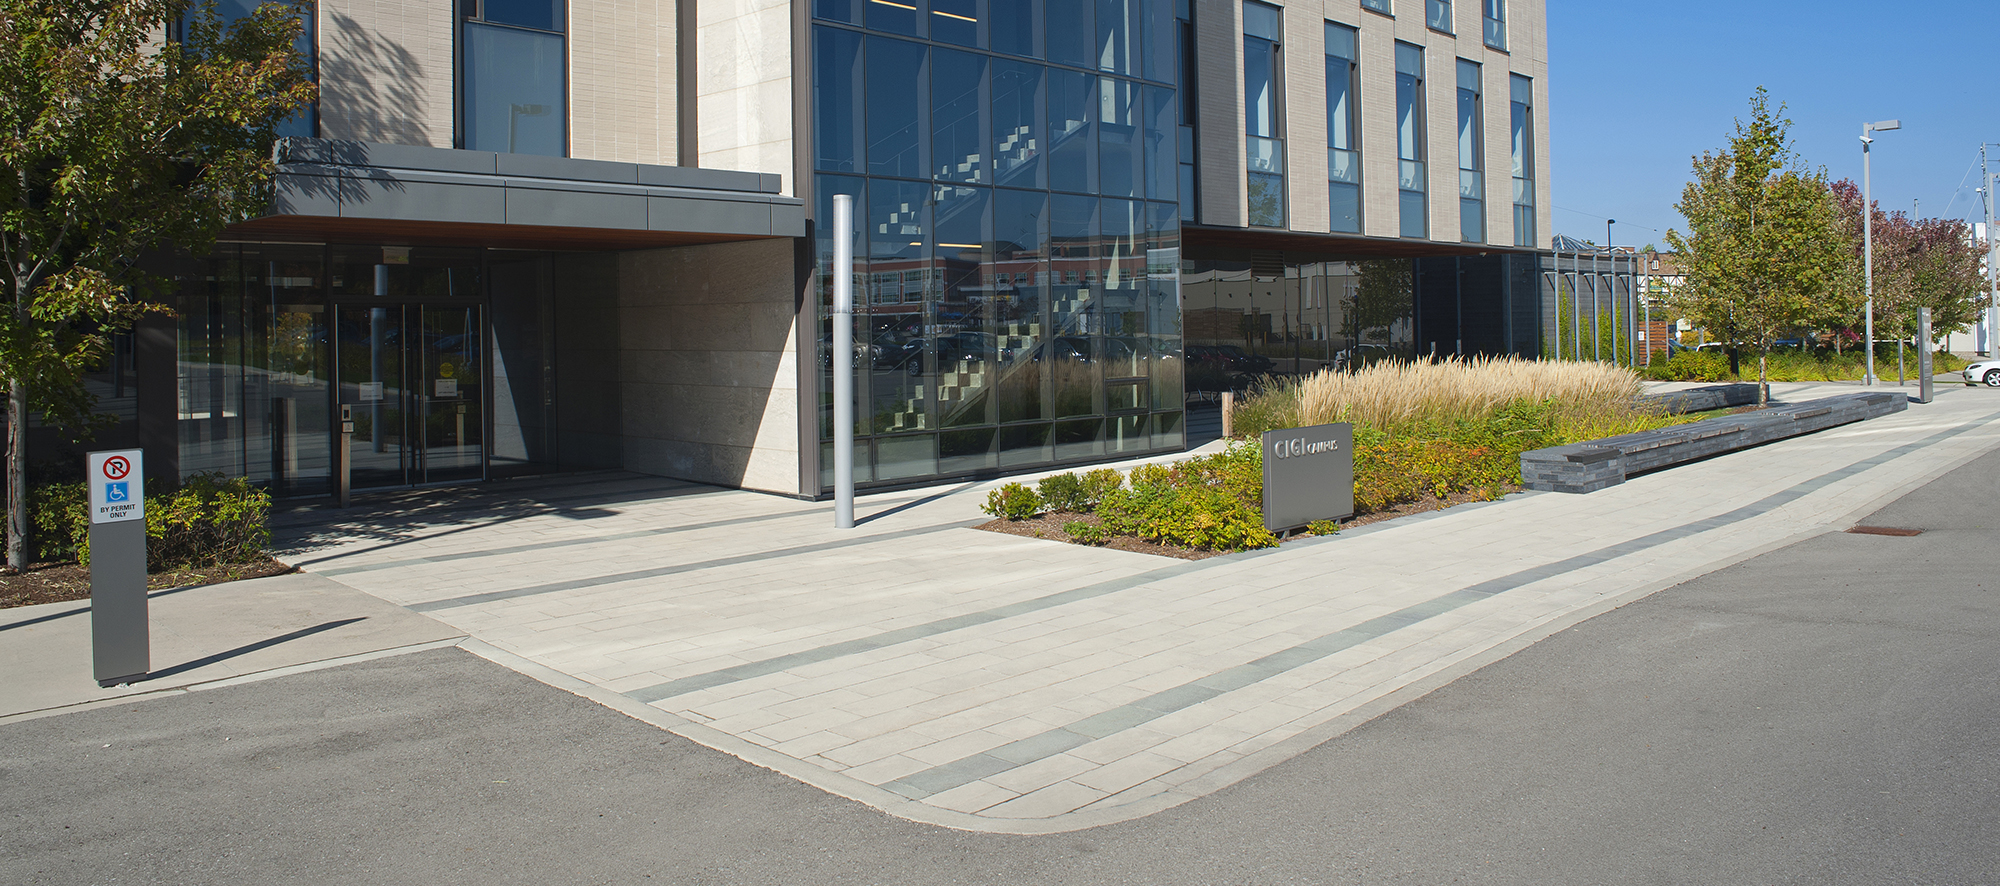 Umbriano pavers are used for the walkway leading to CIGI Campus, with the muted tones matching the building's glass and architecture.